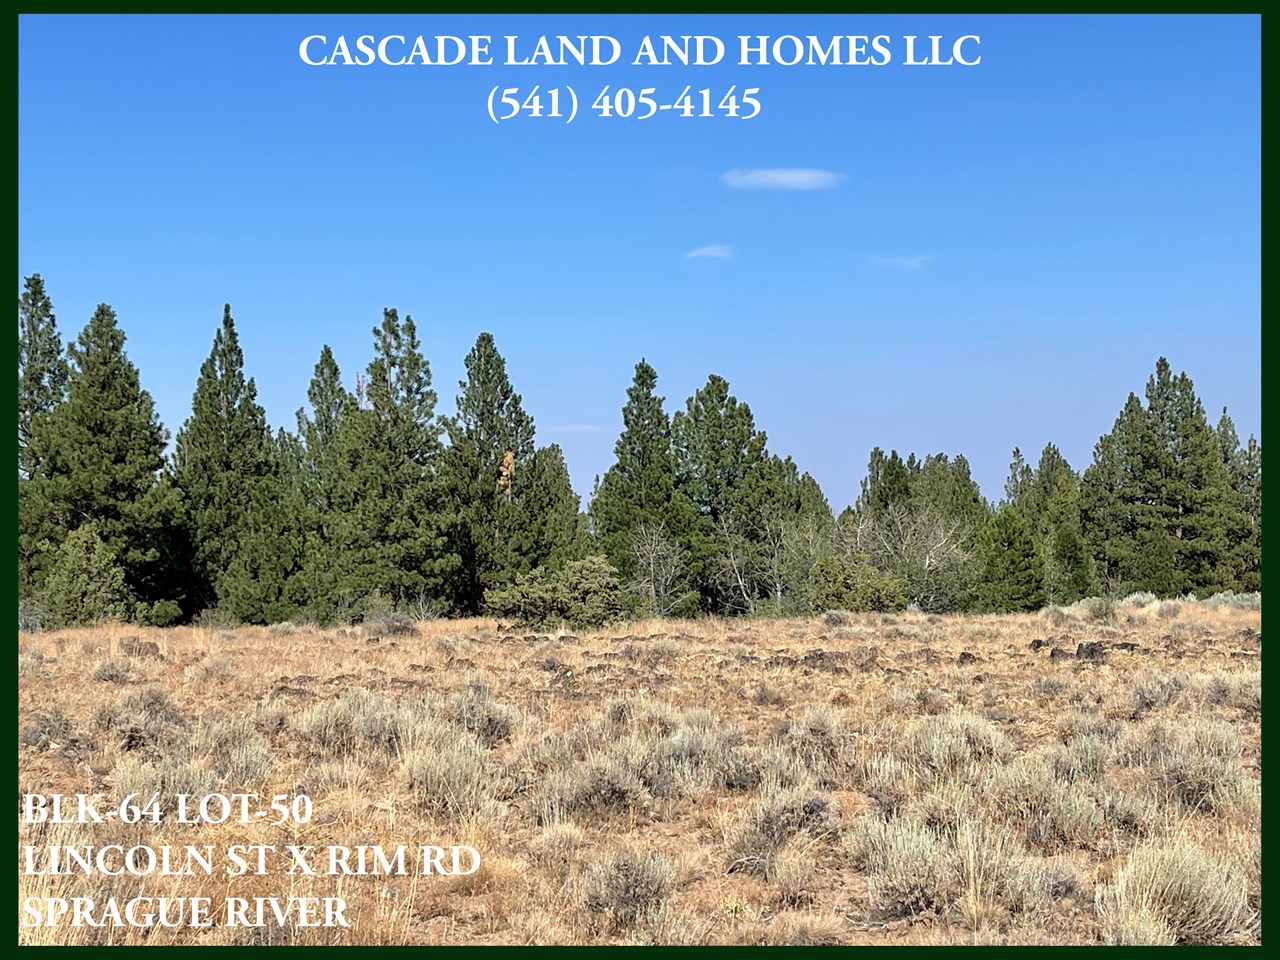 this large corner 1.76 - acre parcel sits on a high plateau that would be a perfect rural homesite or vacation spot to explore all the nearby wilderness has to offer! it has beautiful views of the surrounding countryside, trees and mountains.